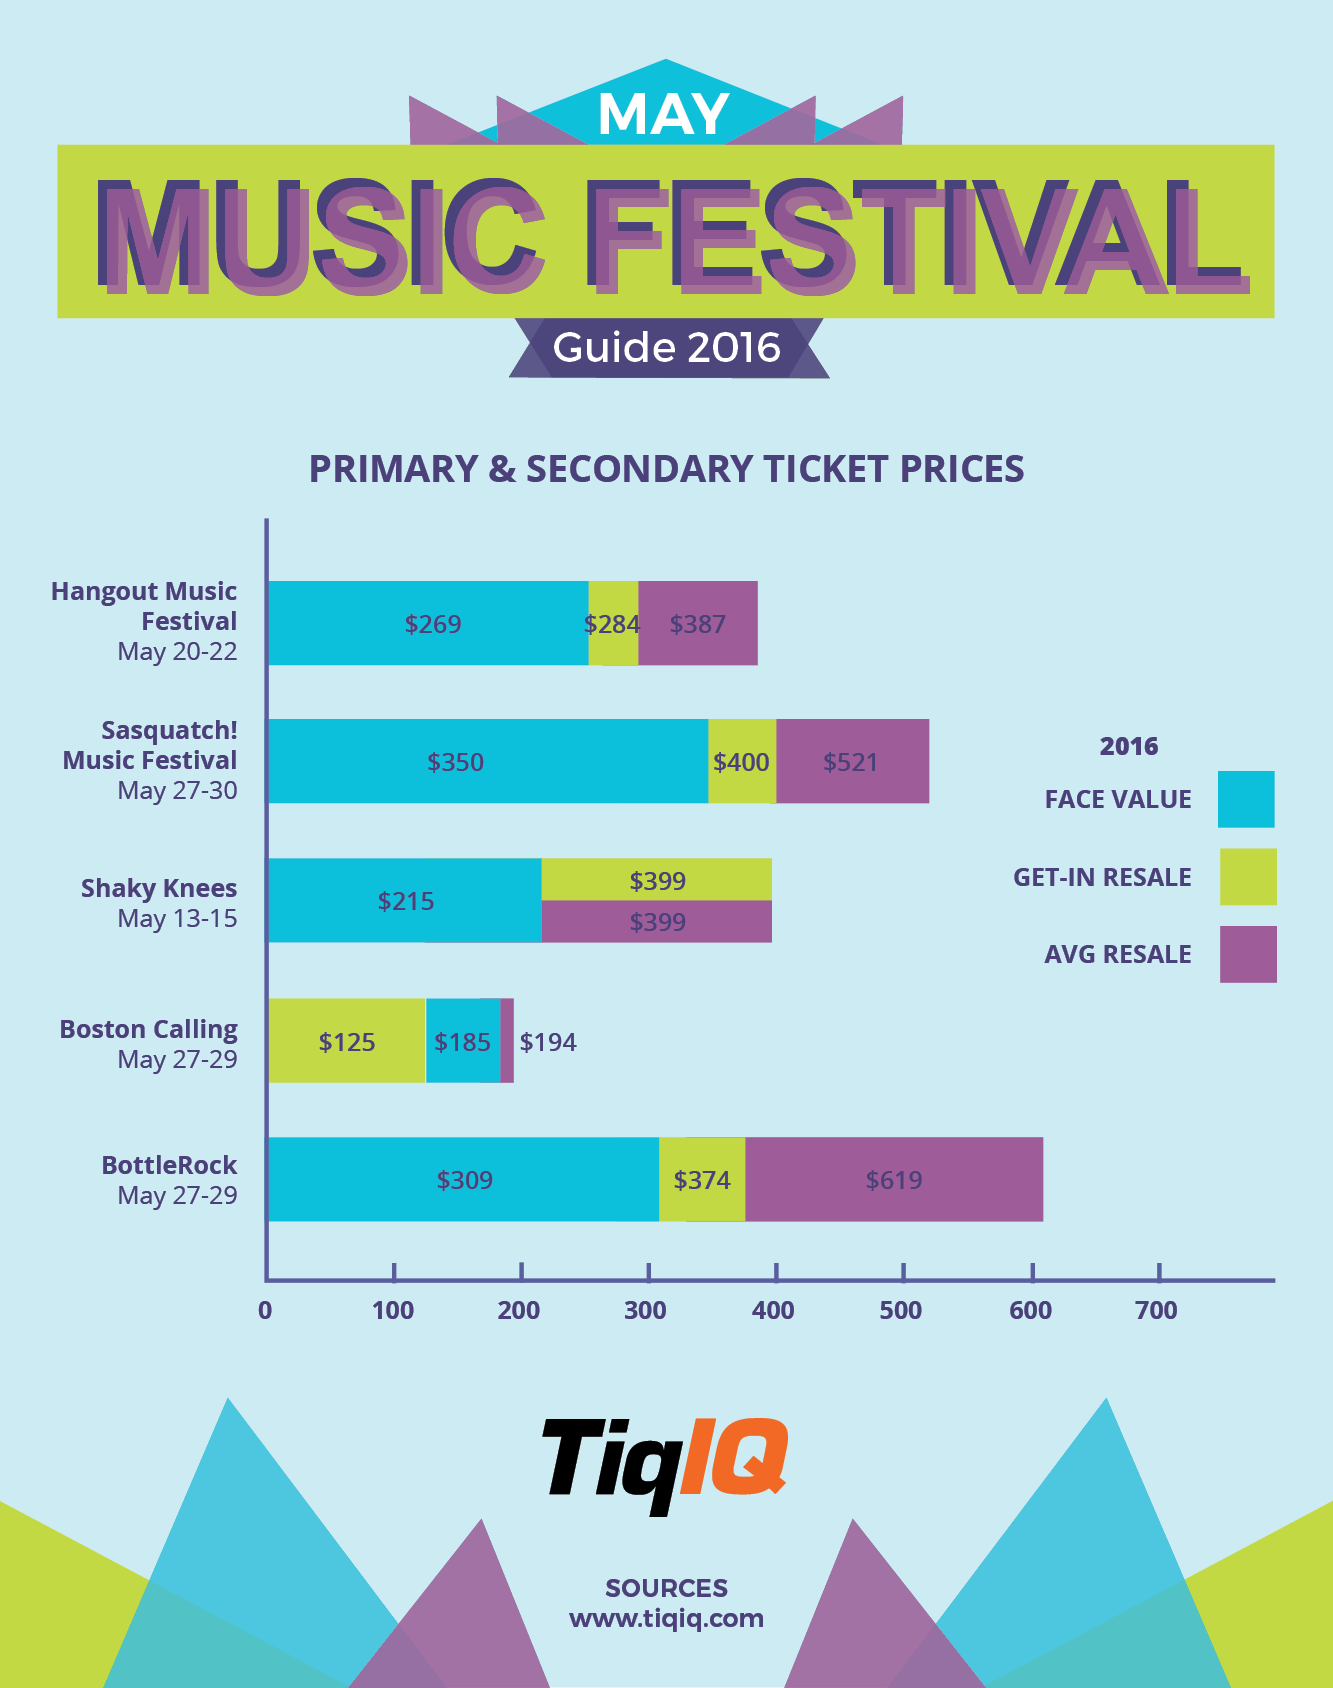 May 2016 Music Festival Ticket Buying Guide Hangout Music Fest, Shaky